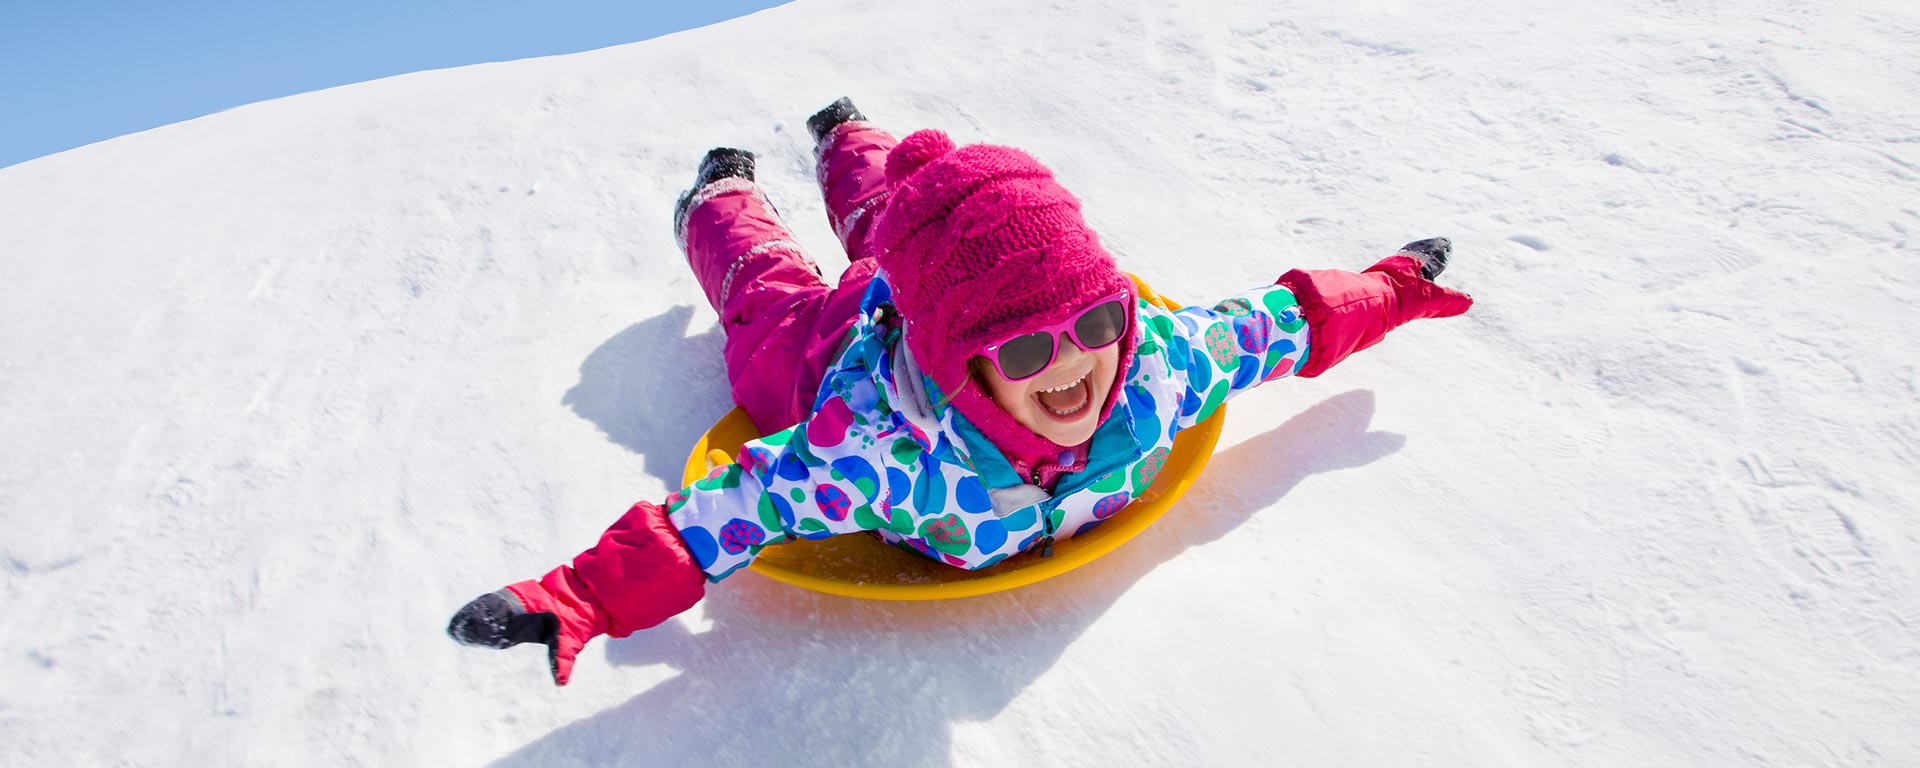 a child dressed in pink and bluish is riding a plastic snow sled laying on it's stomach